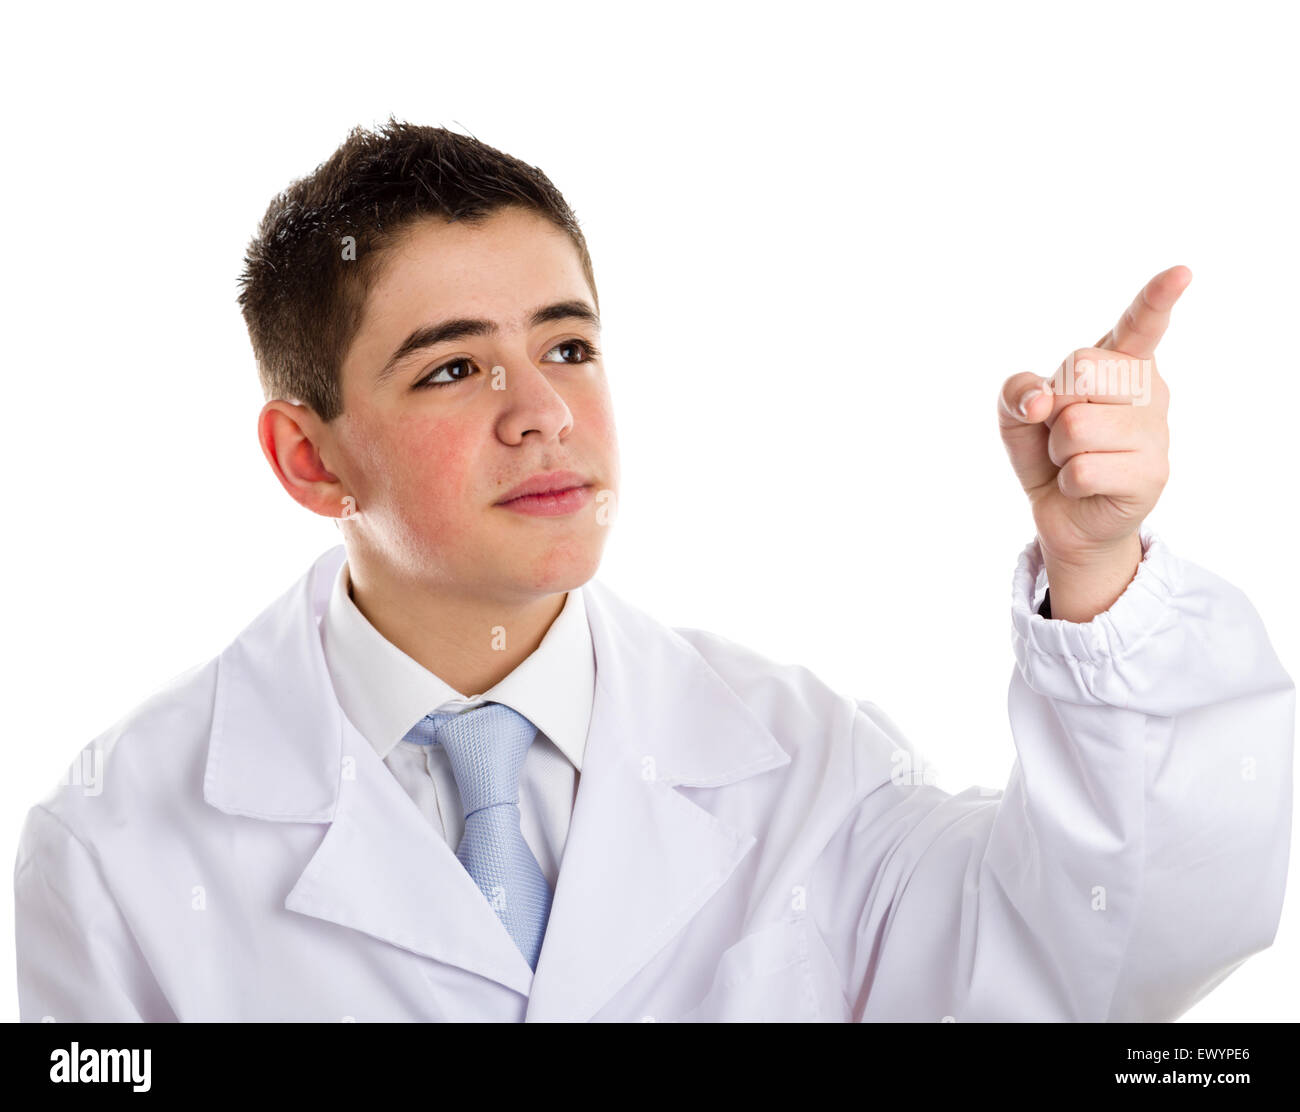 A boy doctor in white coat and blue tie helps to feel medicine more friendly: he is pointing with forefinger to his left side.. His acne skin has not ben retouched Stock Photo